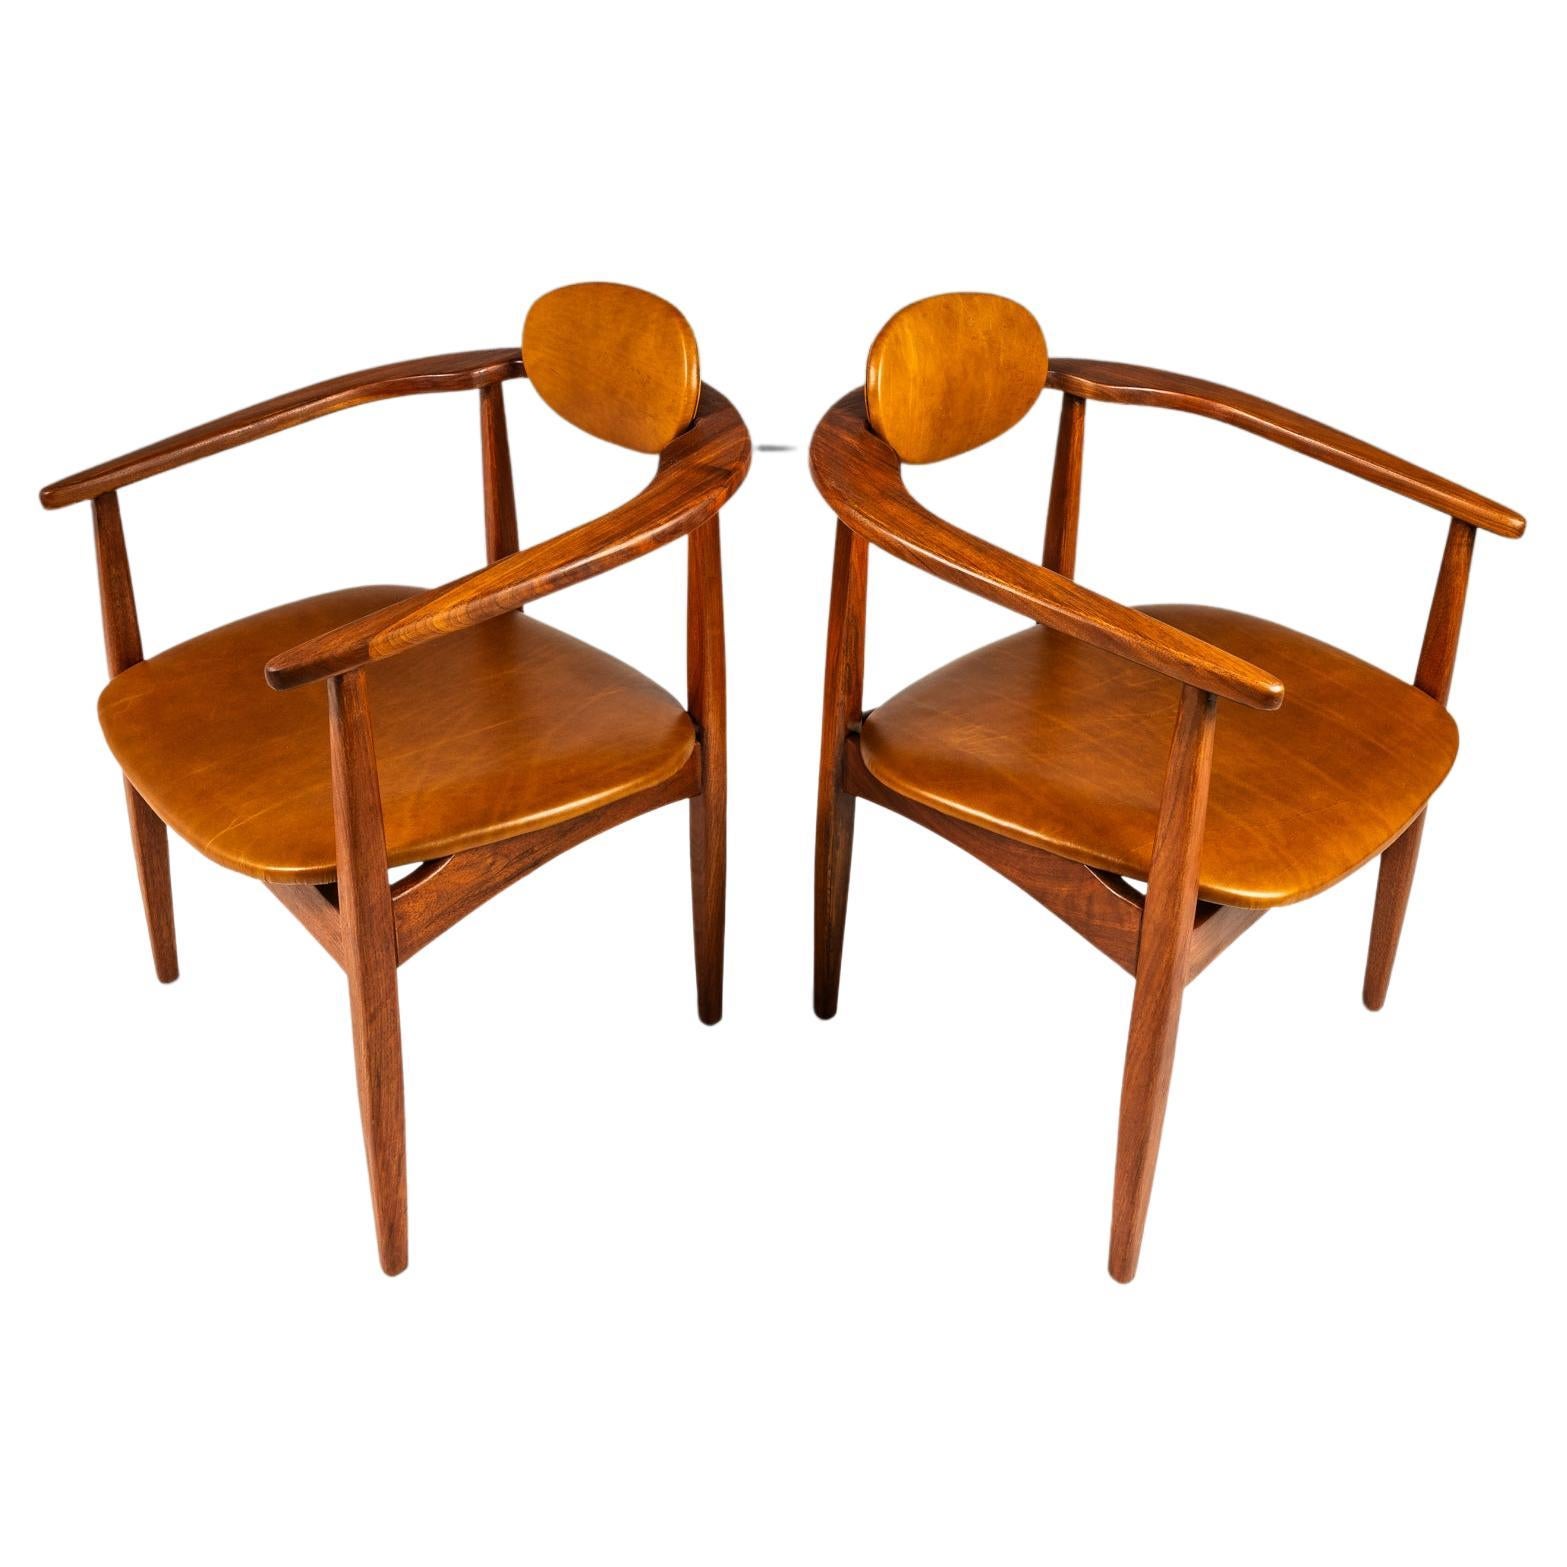 Set of 2 Sculptural Lounge Chairs, Leather & Walnut, Adrian Pearsall Style, 1960 For Sale